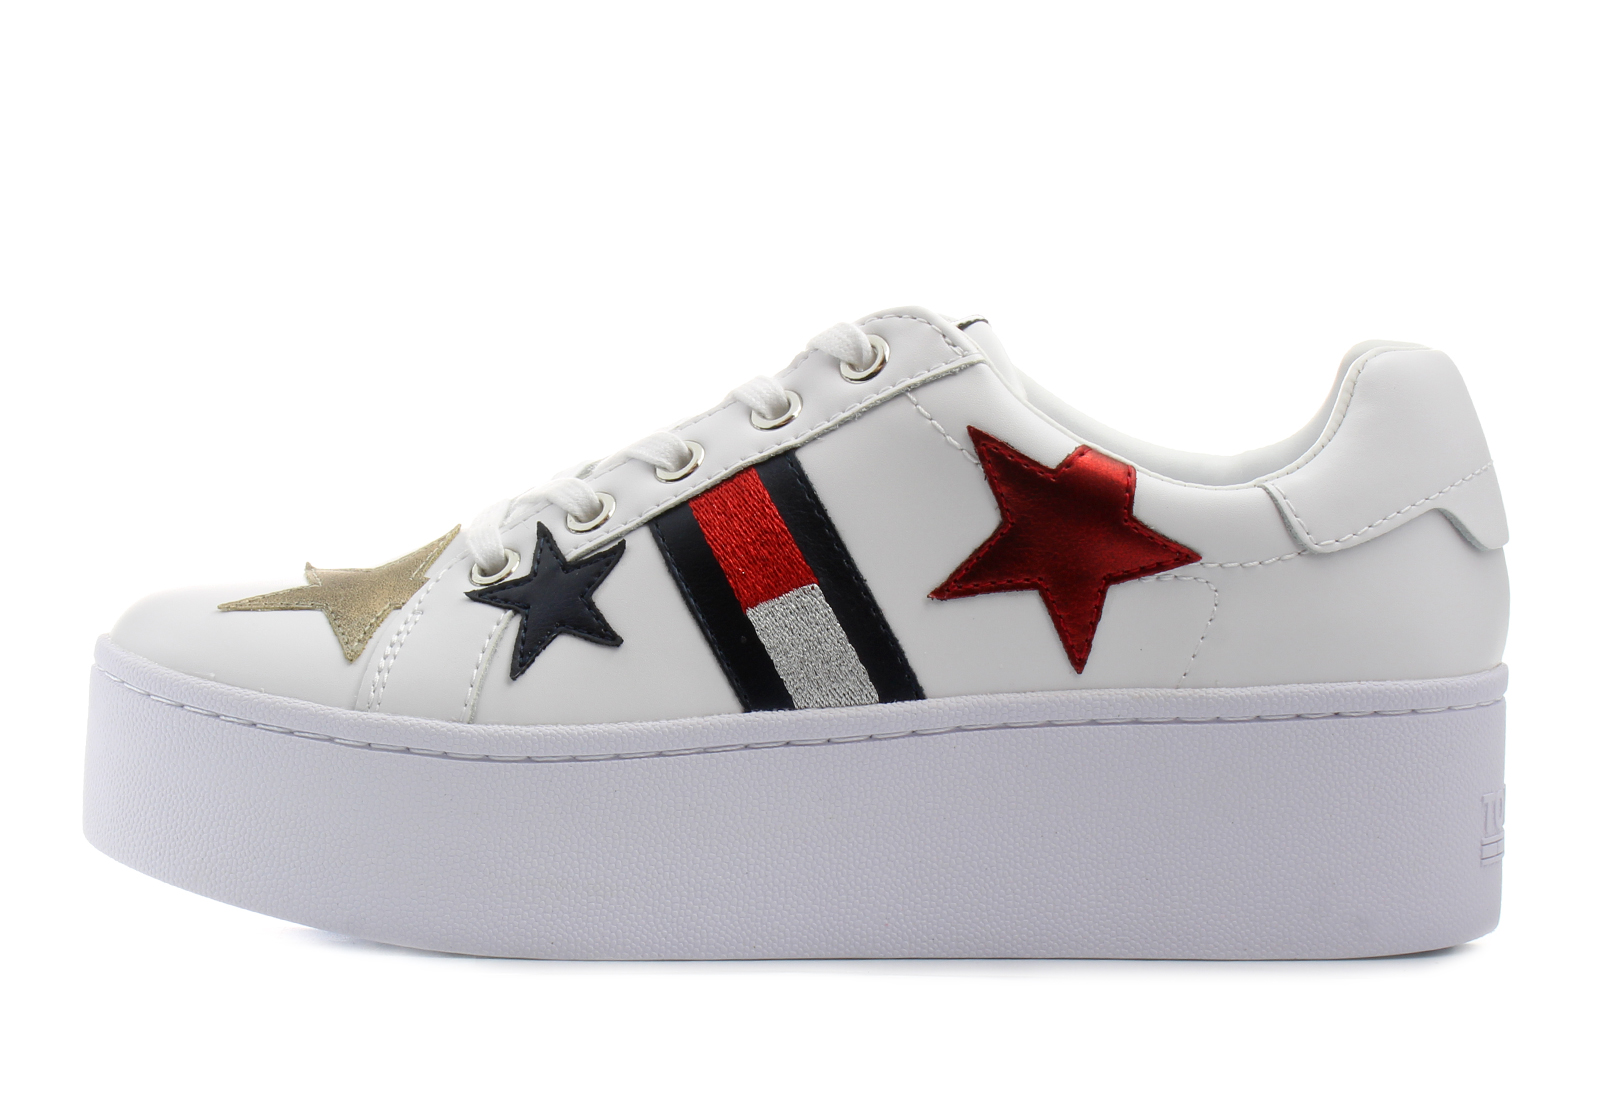 tommy hilfiger roxie sneakers